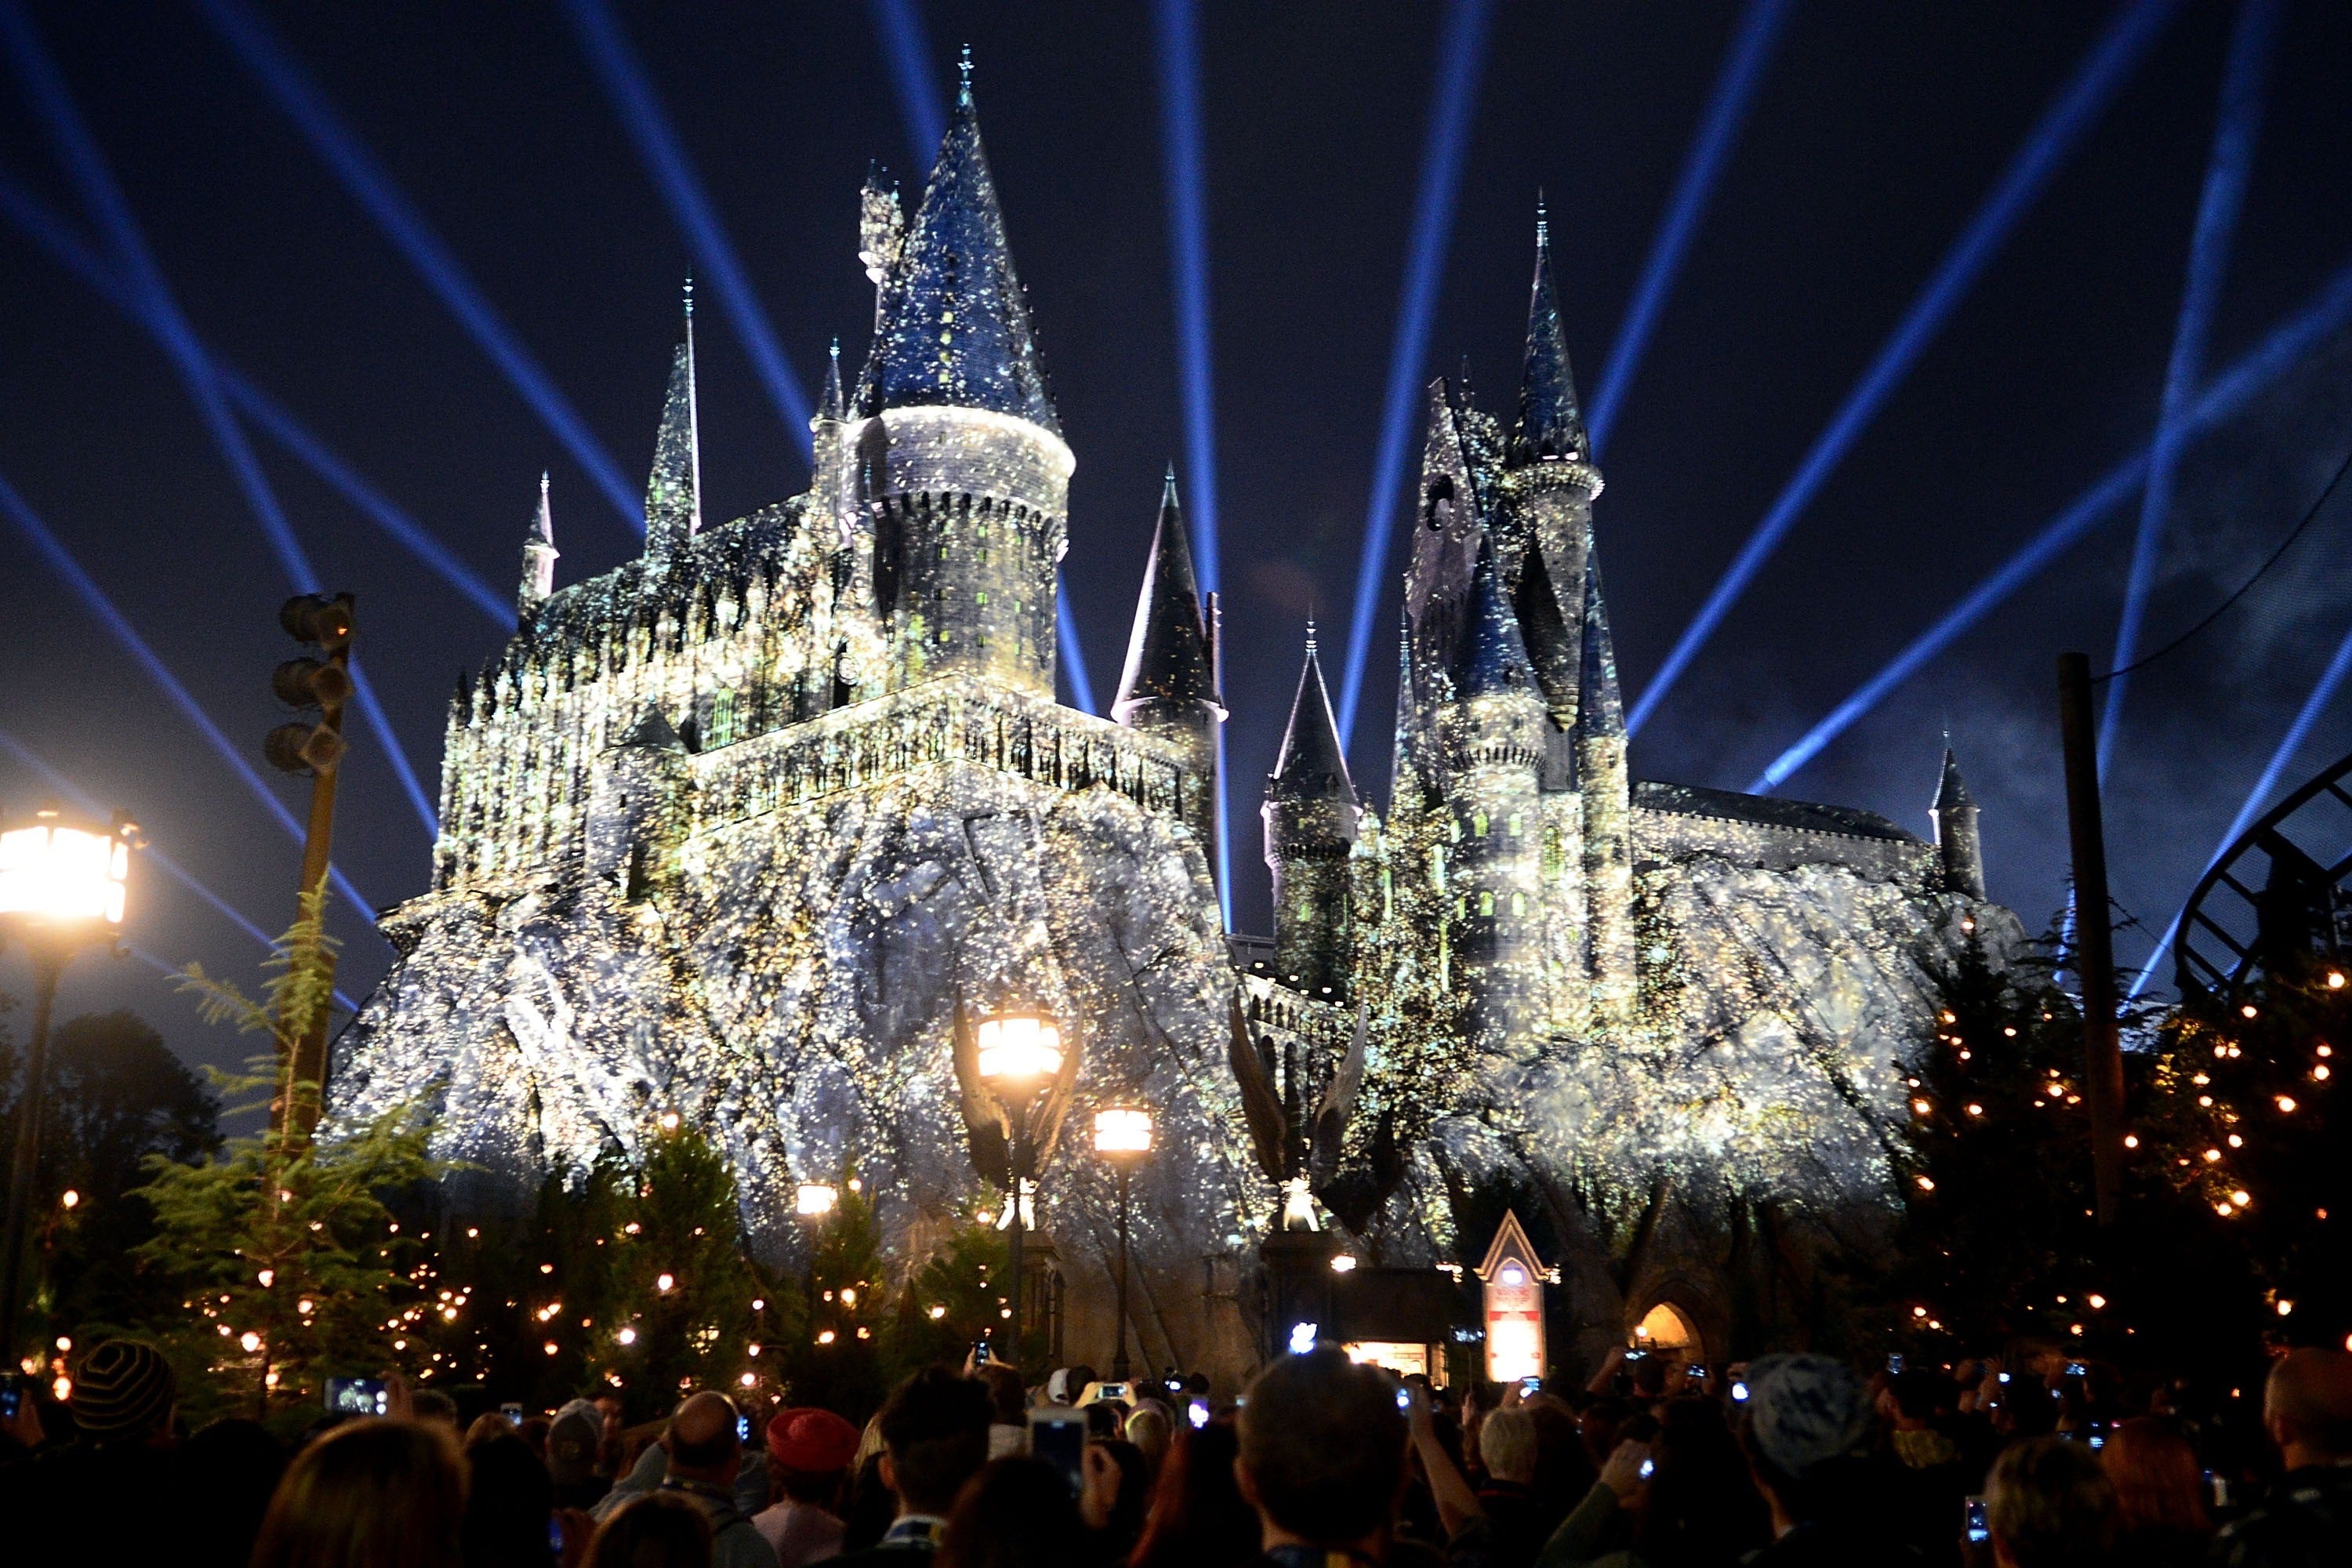 Christmas is coming to Harry Potter's Wizarding World